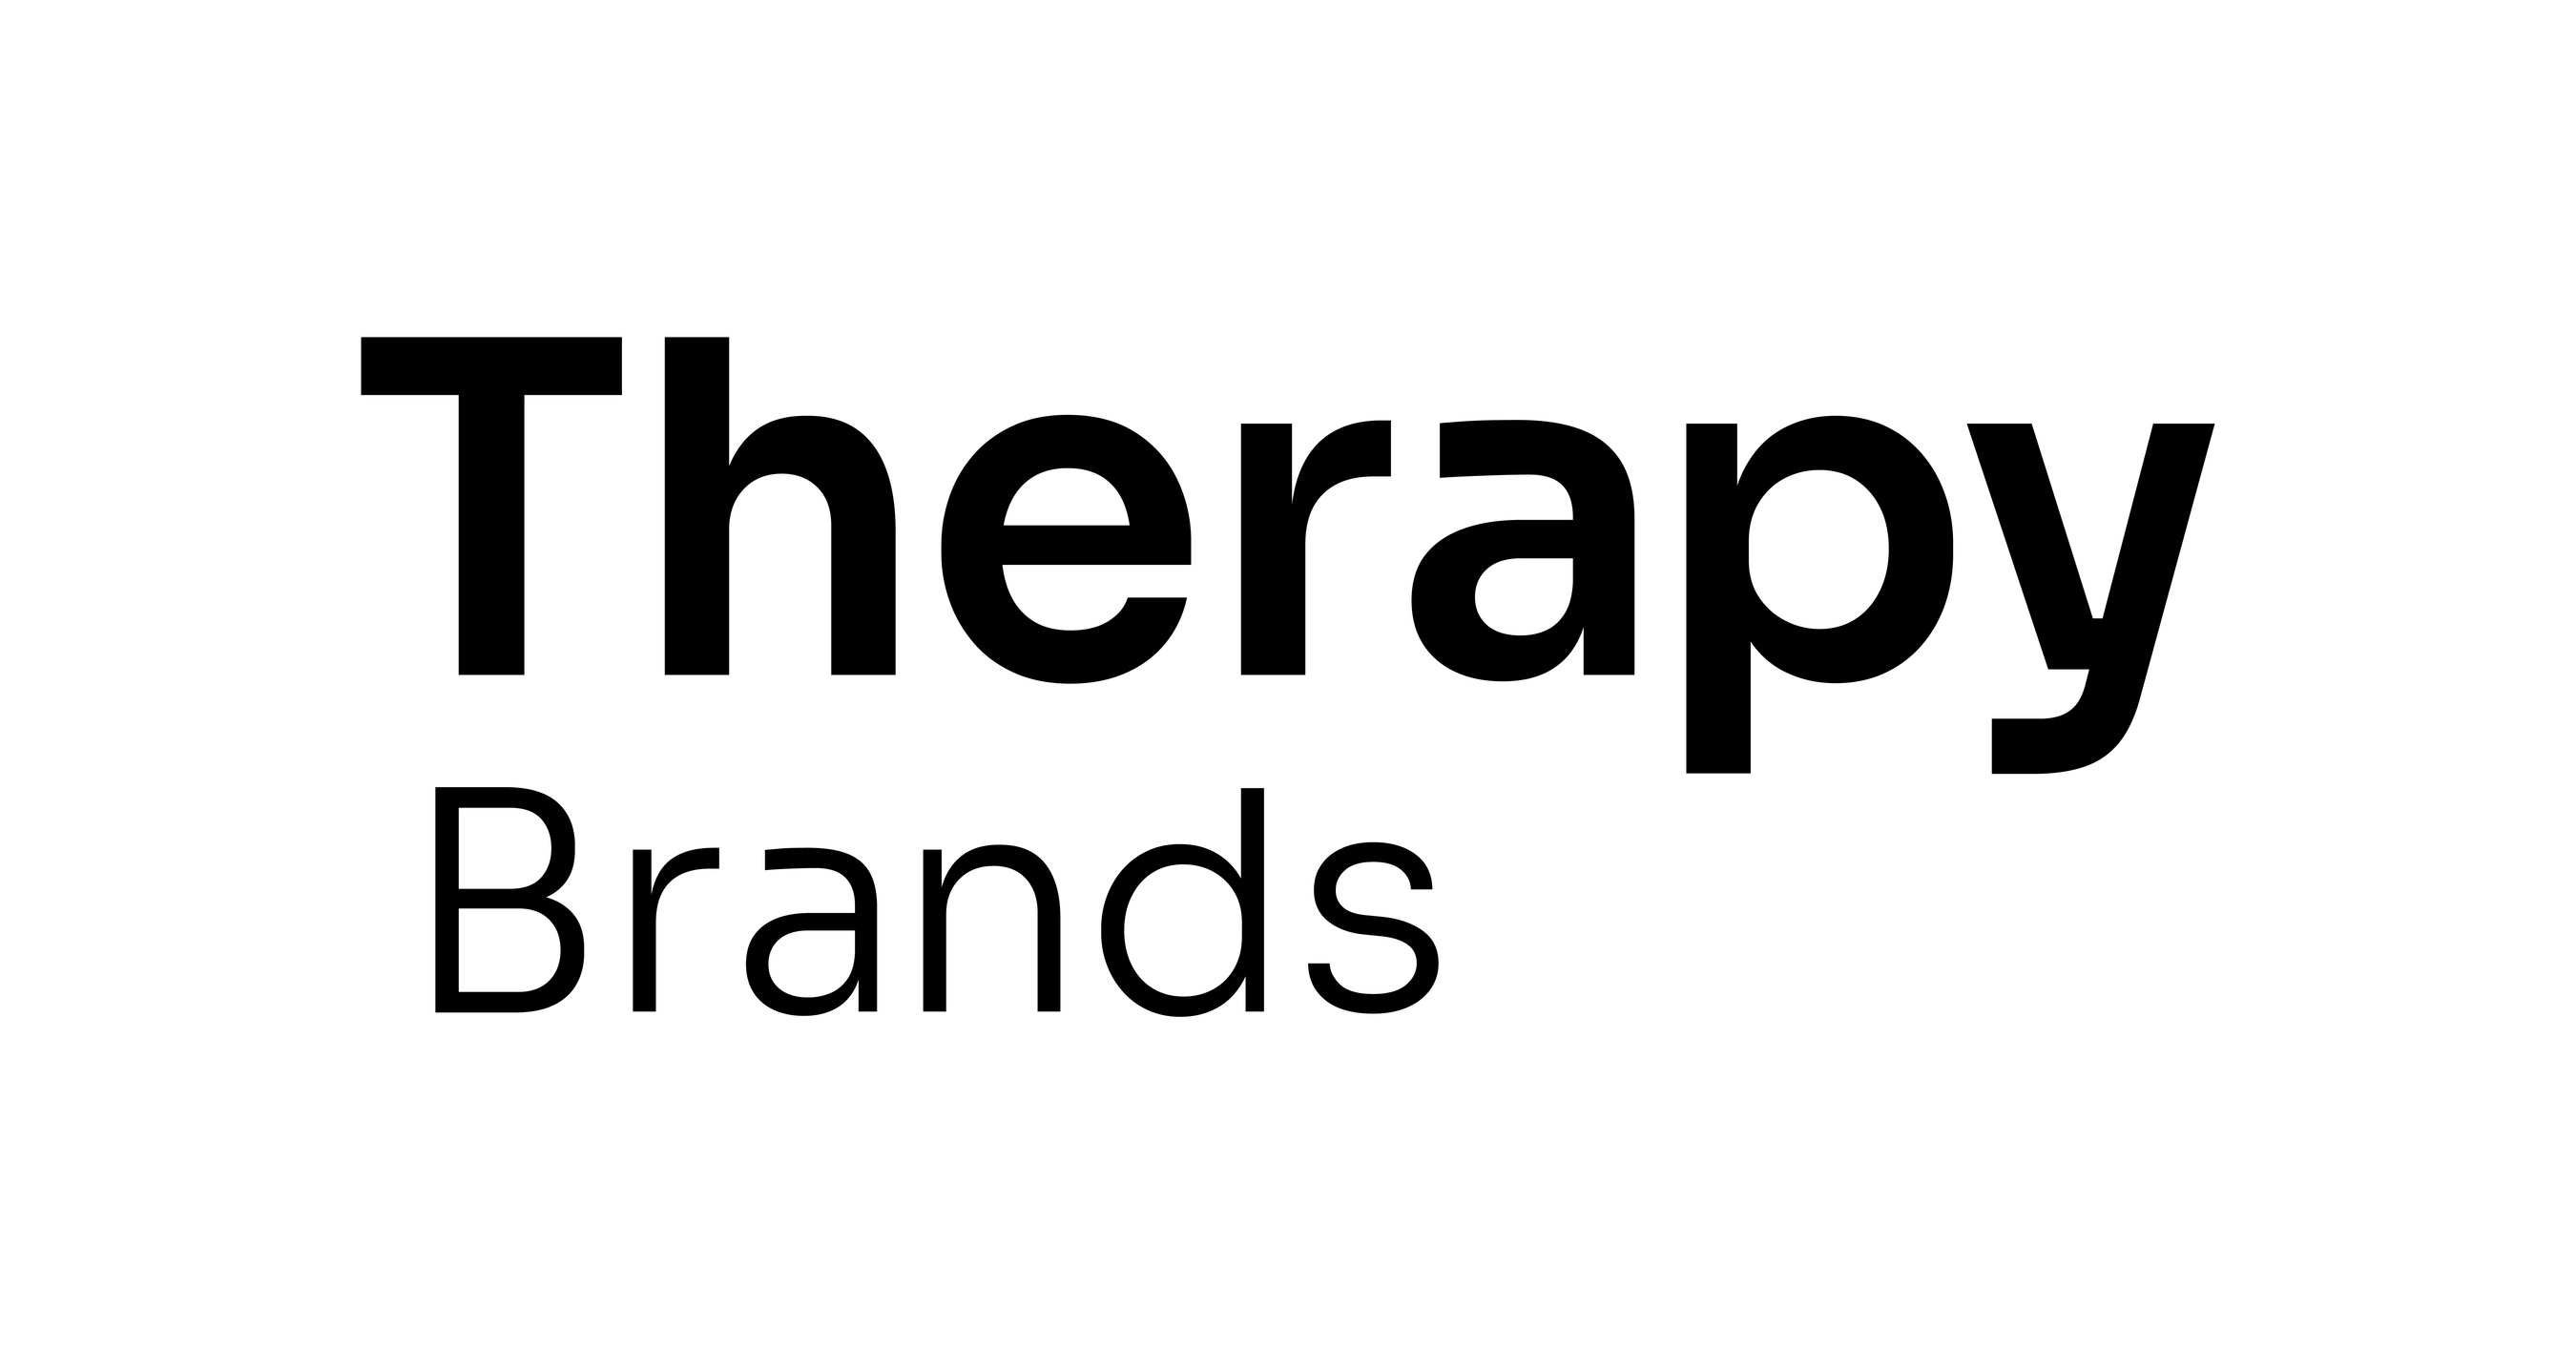 Therapy Brands Partners with WebMD Care to Expand Access to Mental and Behavioral Health Practitioners